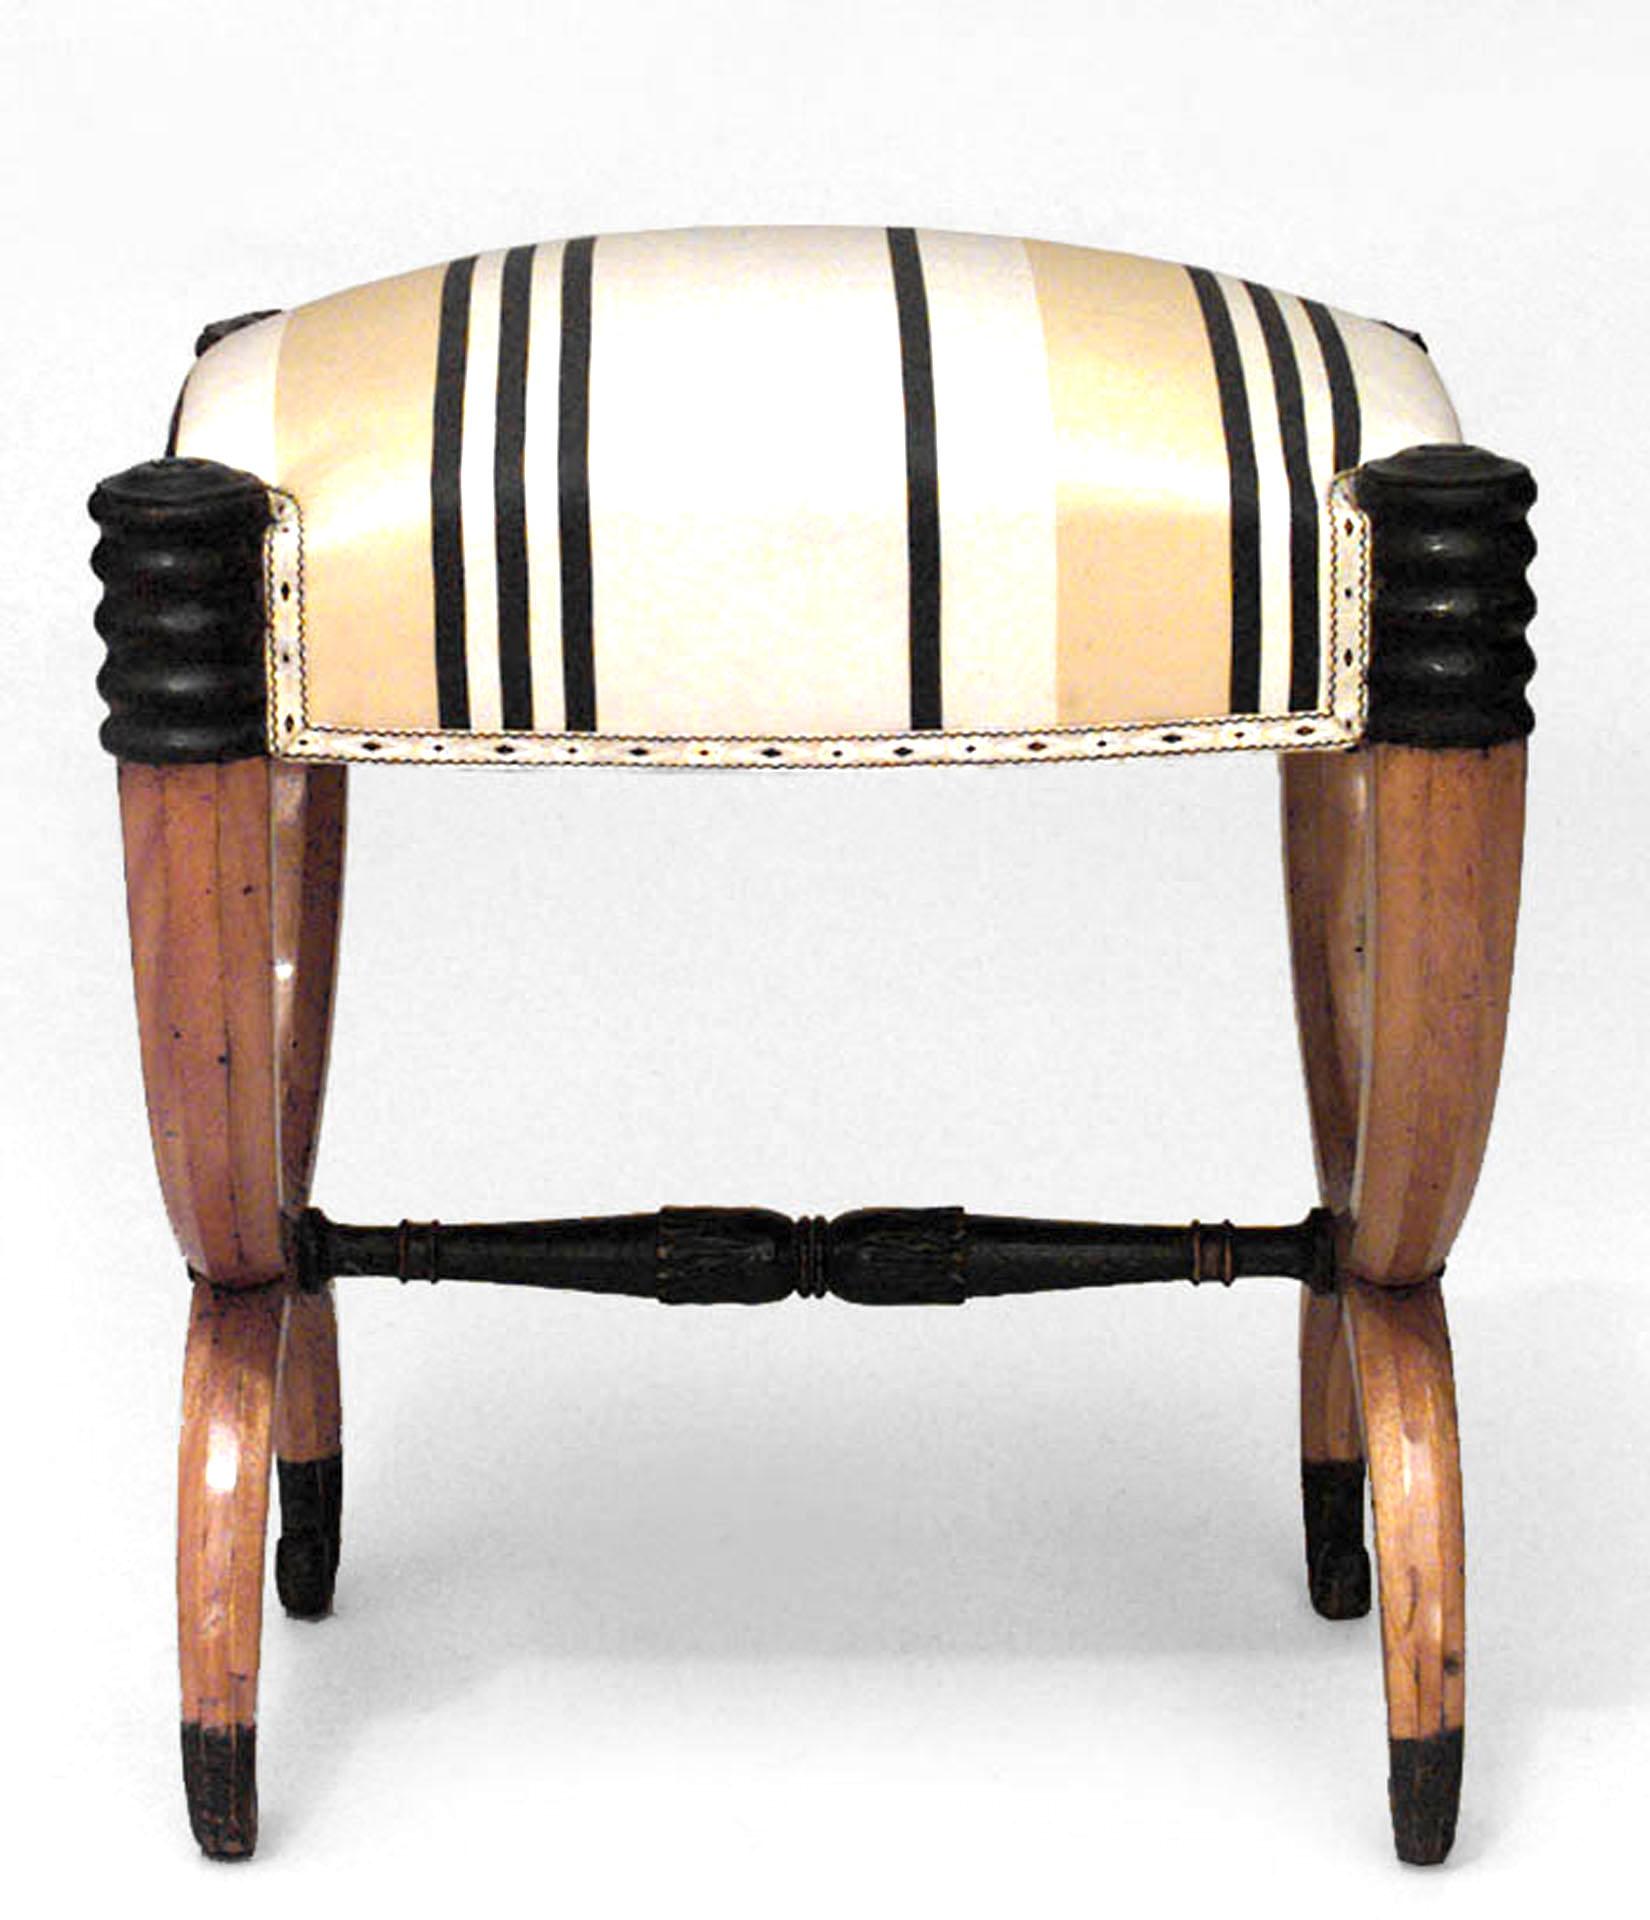 Neoclassical Pair of Continental Neoclassic Striped Benches